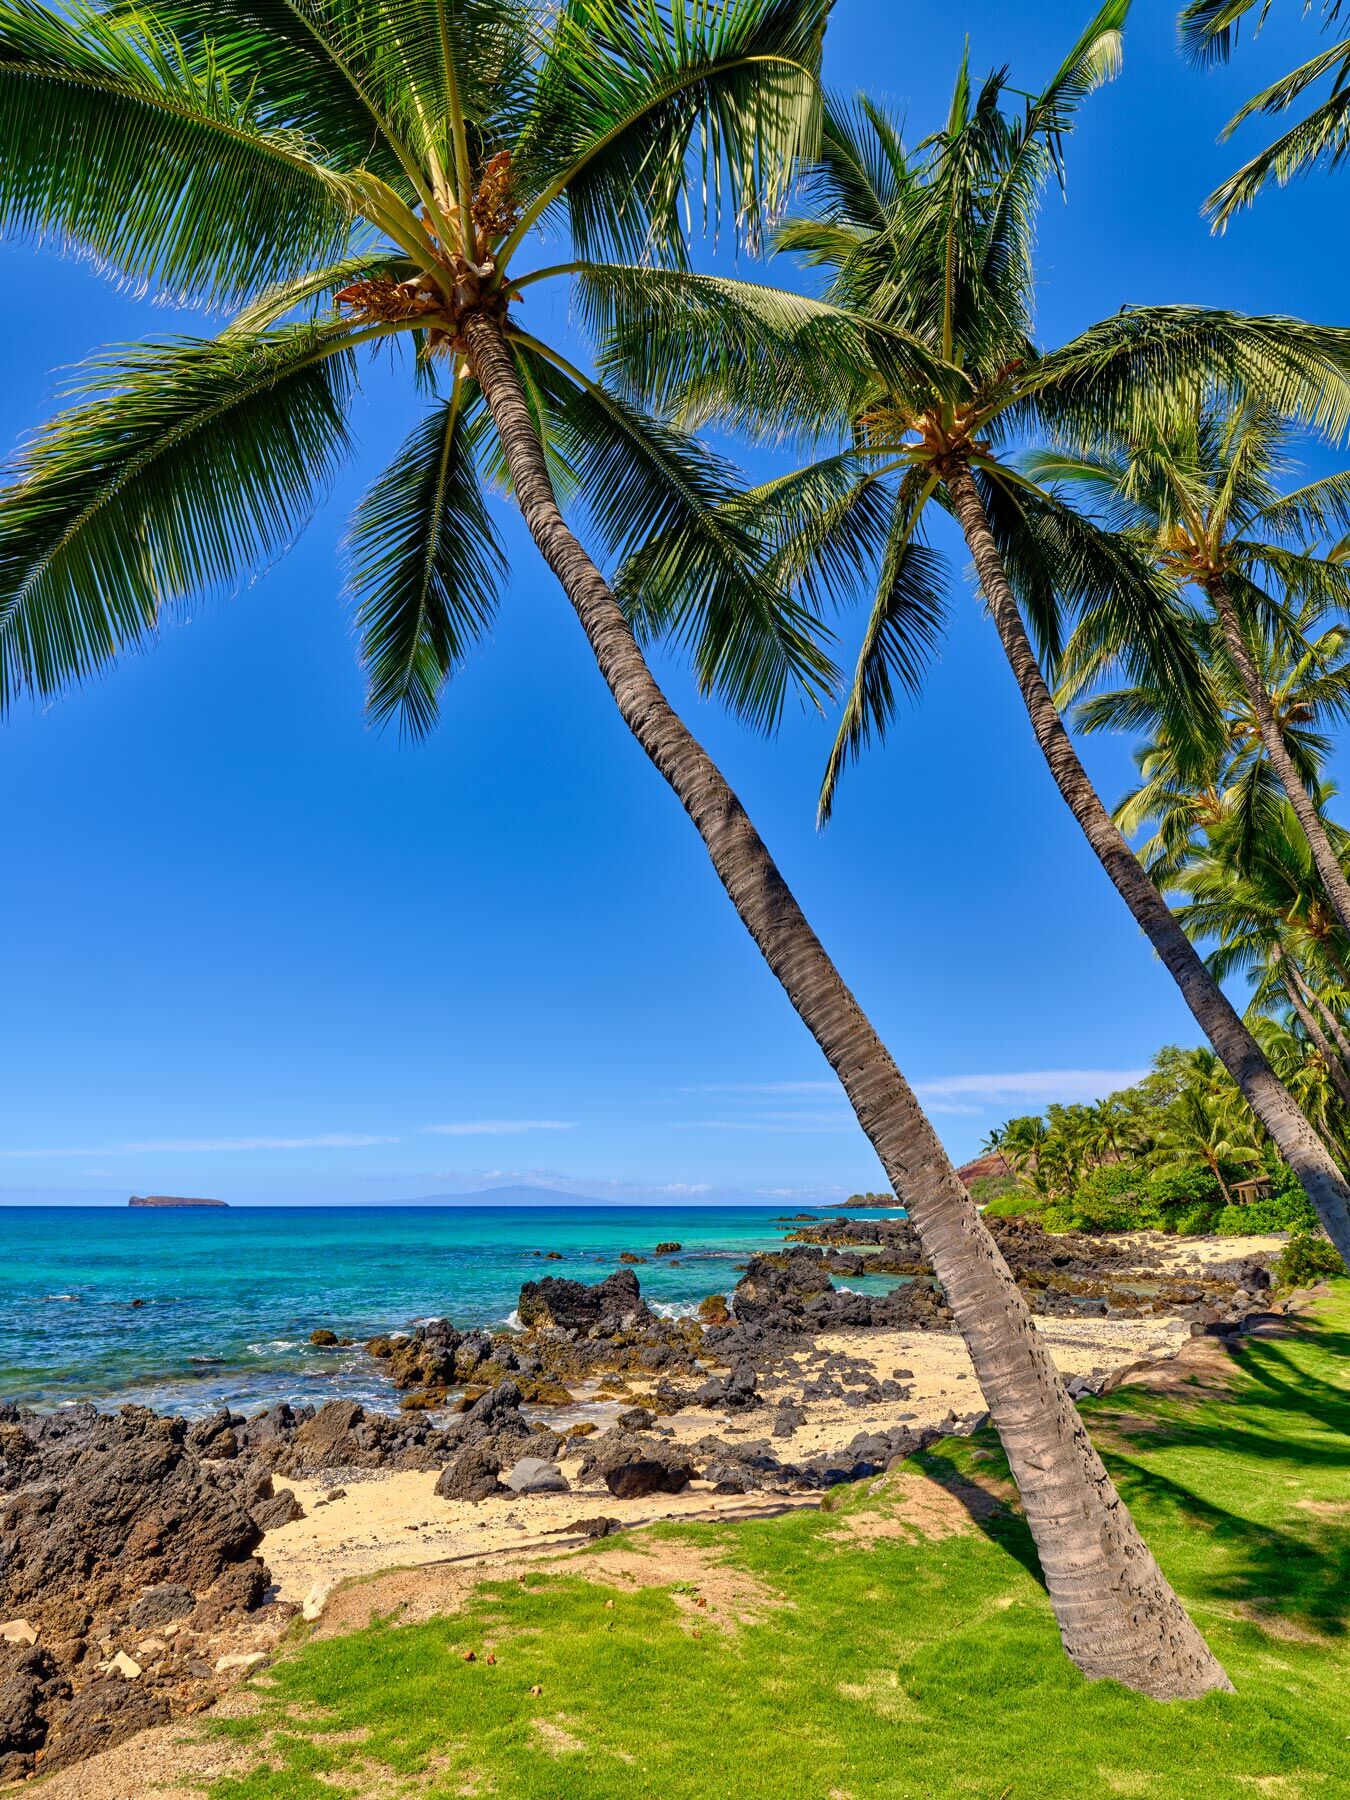 A beautiful row of palms along the coastline in Makena caught my eye.  In the background is the famous Molokini crater and the...